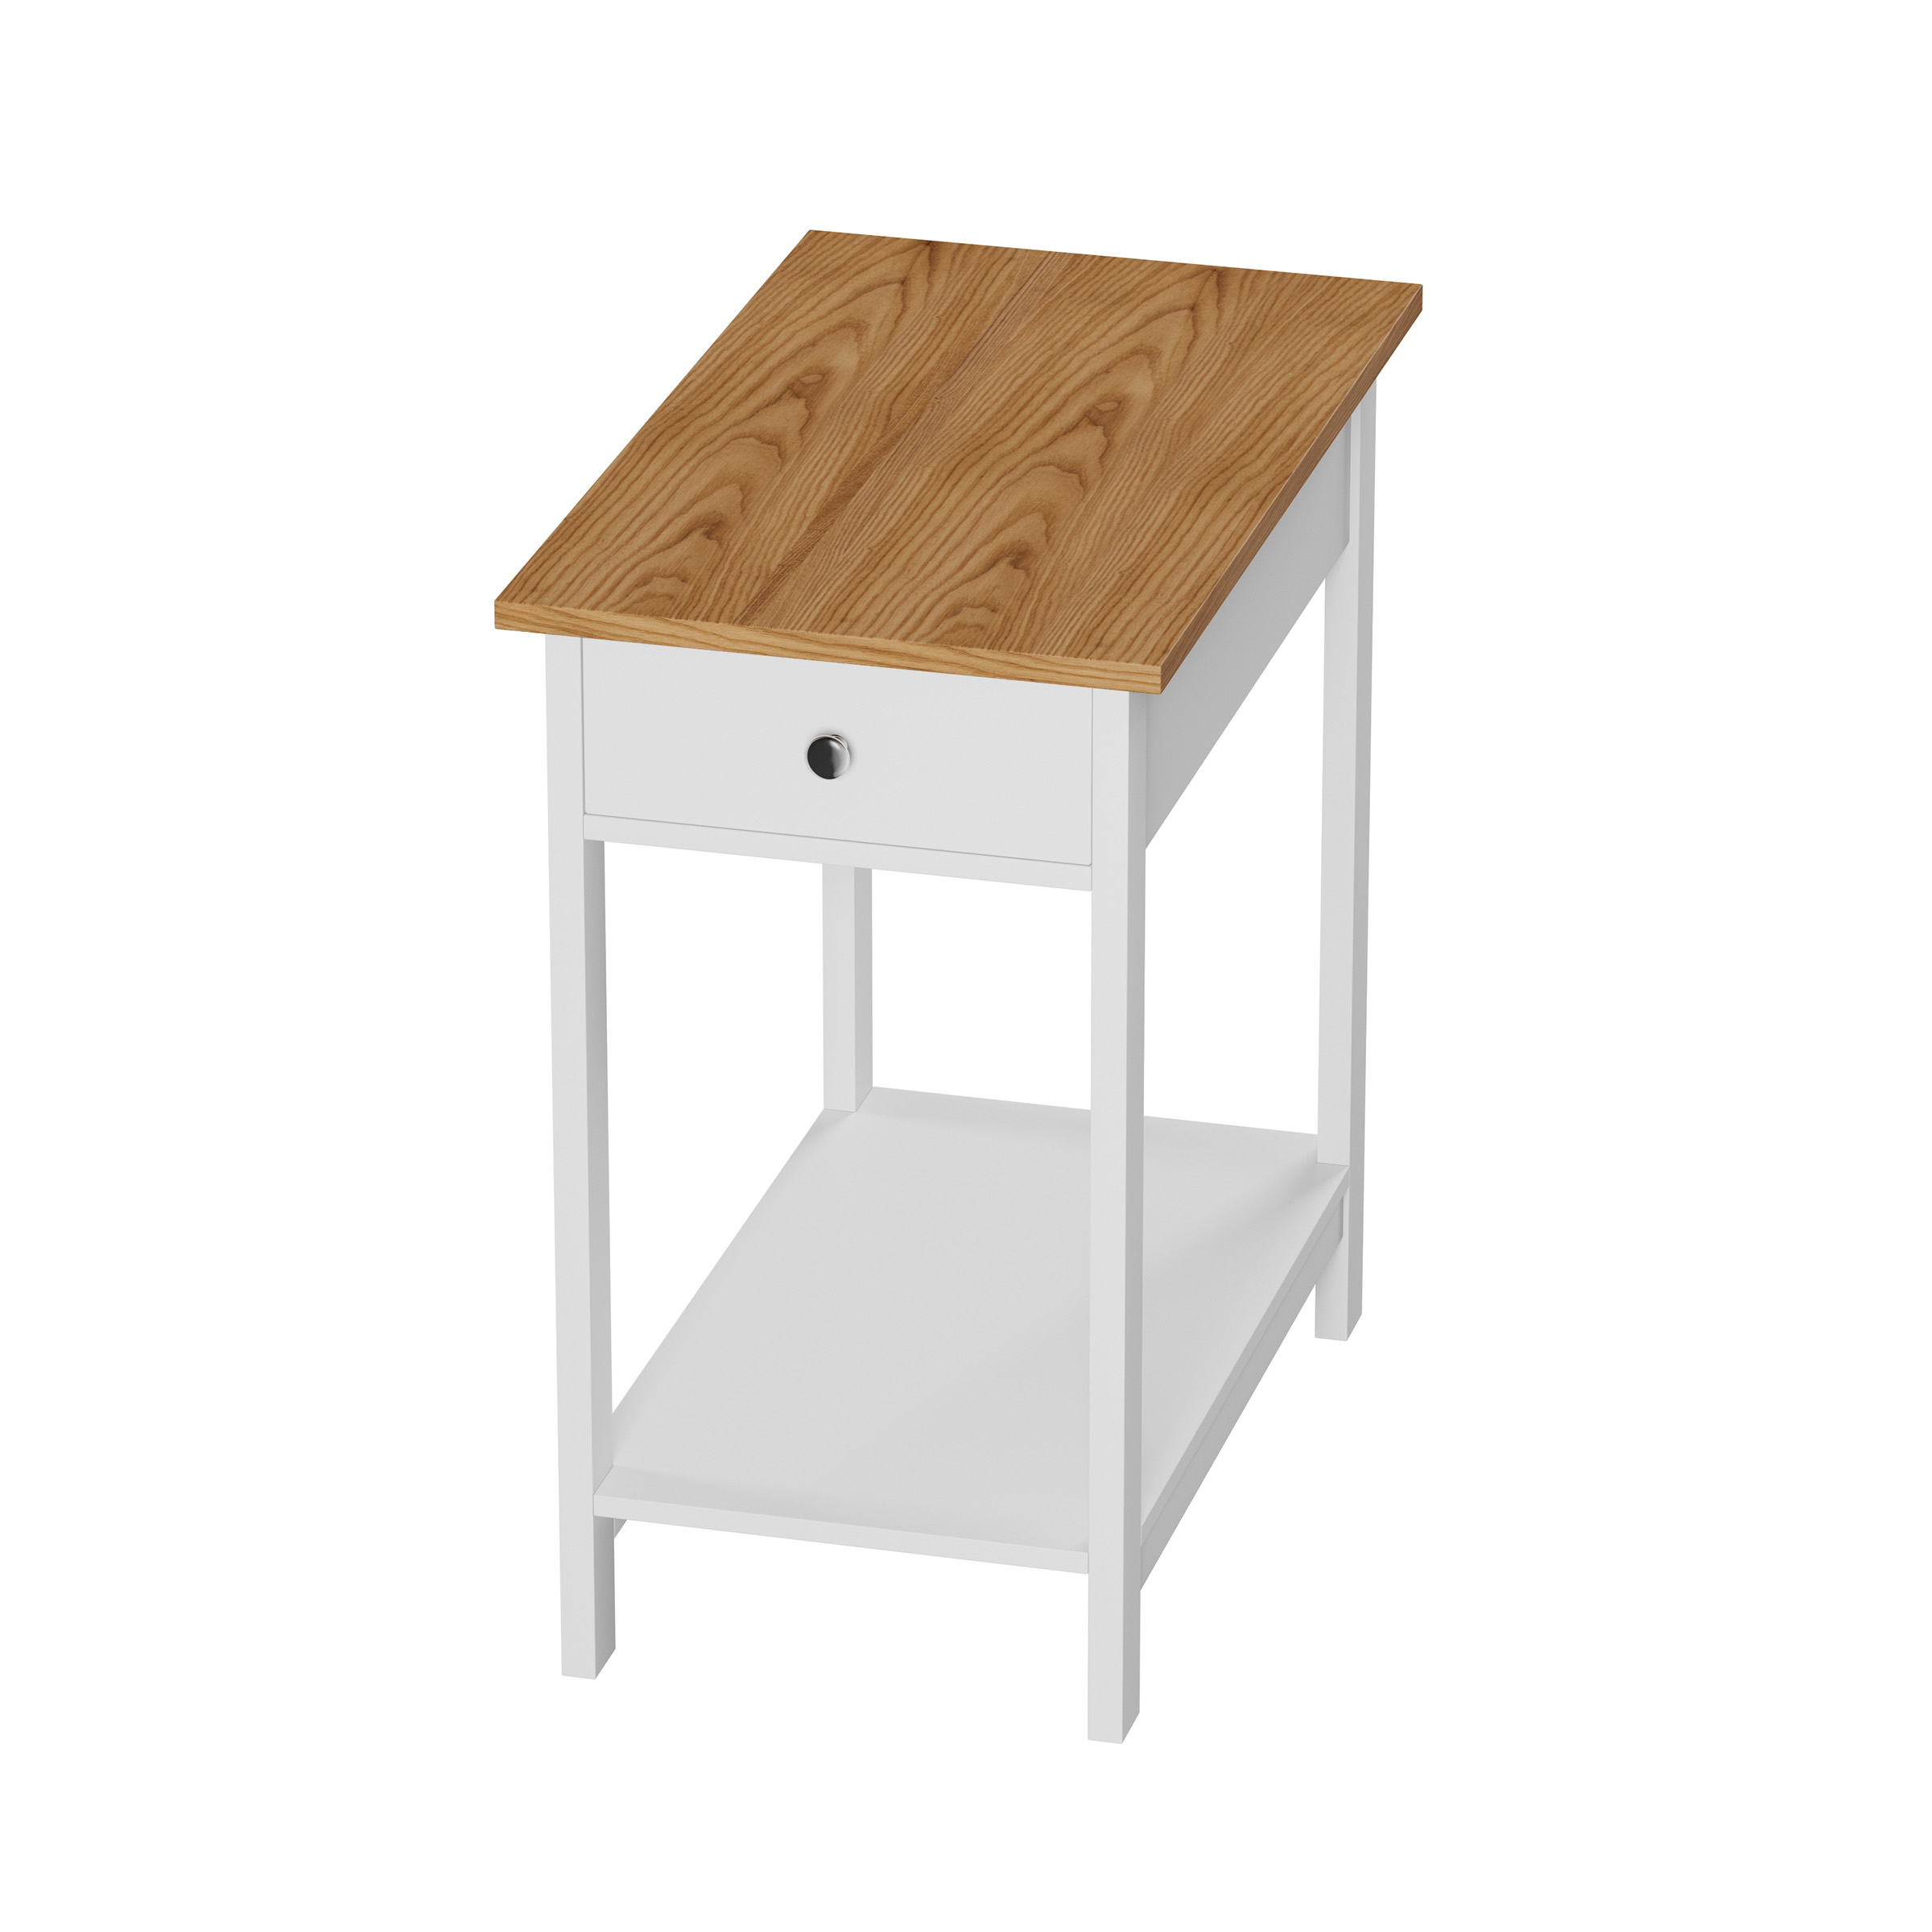 Side Table With Drawer- Narrow End Table With Storage Shelf- 2 Toned Wood Stand For Bedroom, Living Room & Entryway